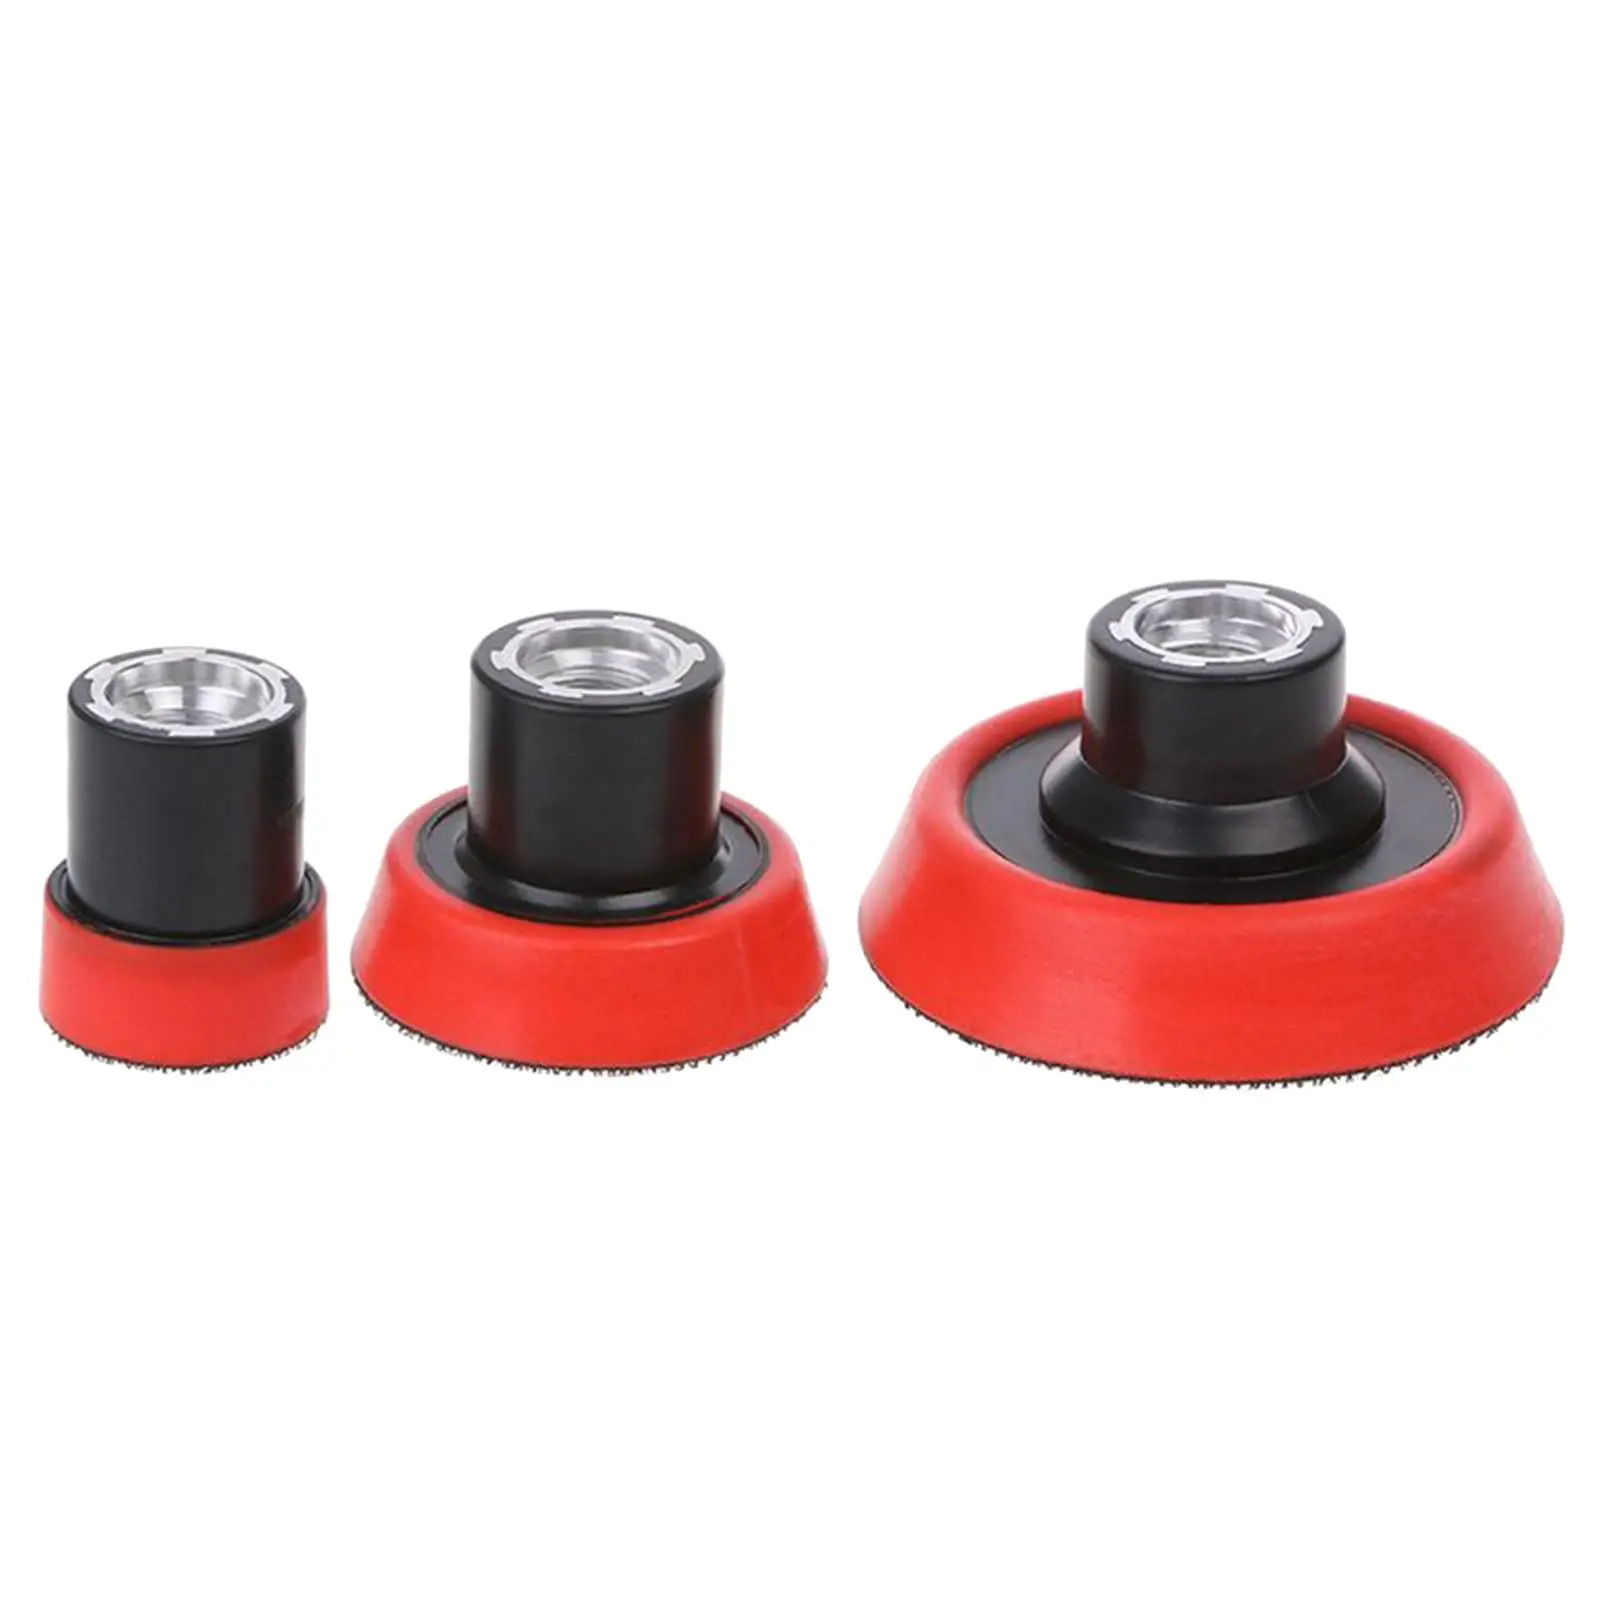 3 Pieces Polisher Set Backer Buffering M14 Backing Plate for Detailing Car  Care